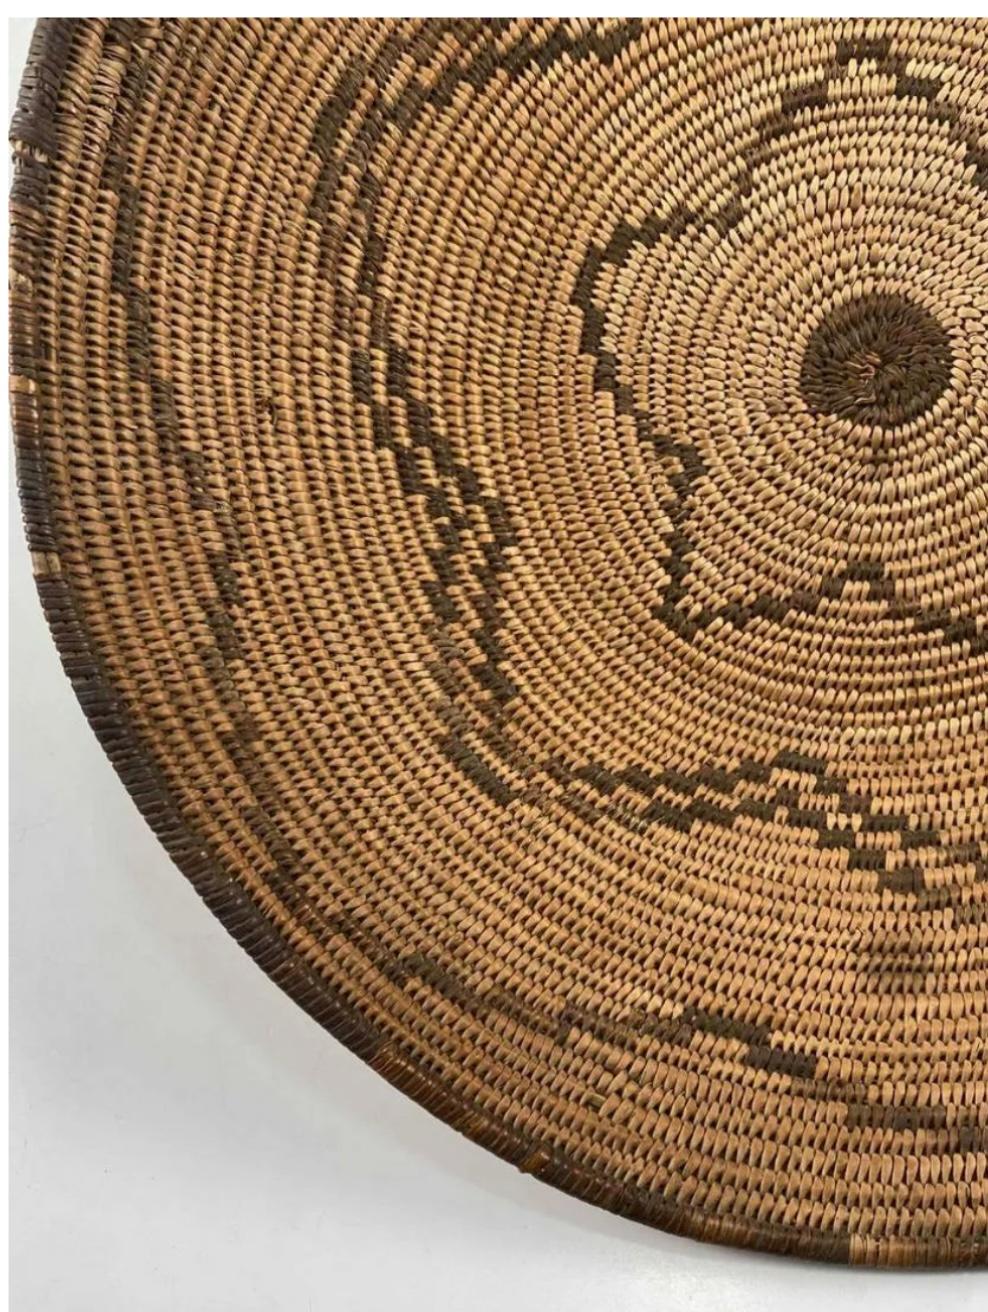 Organic Material Antique Native American Apache Woven Basket For Sale